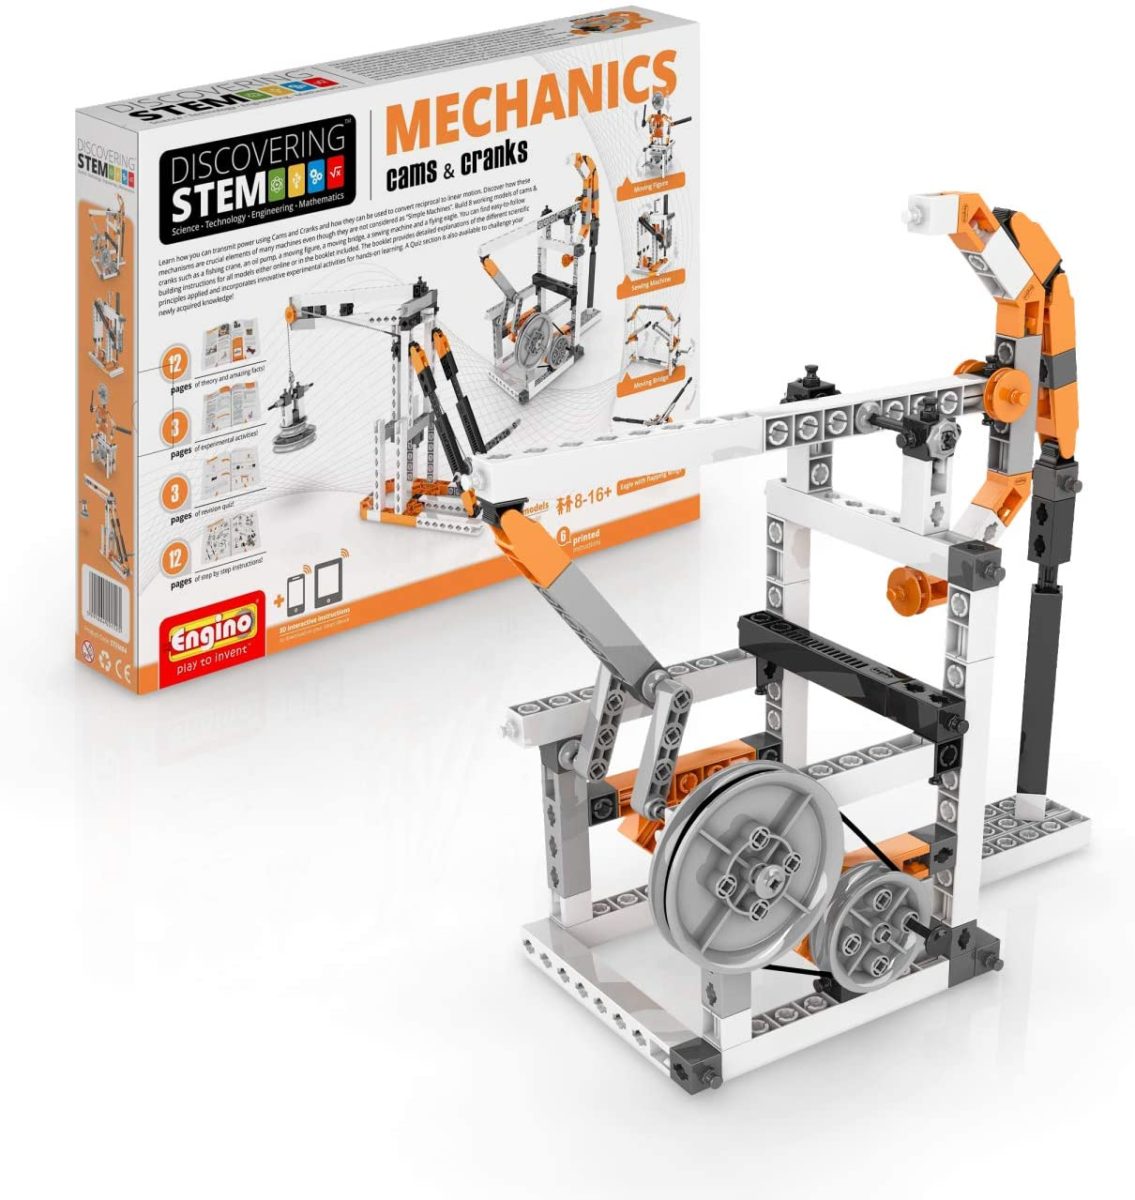 Engino Discovering STEM Mechanics Cams _ Cranks - Top Toys and Gifts for Ten Year Old Boys 1